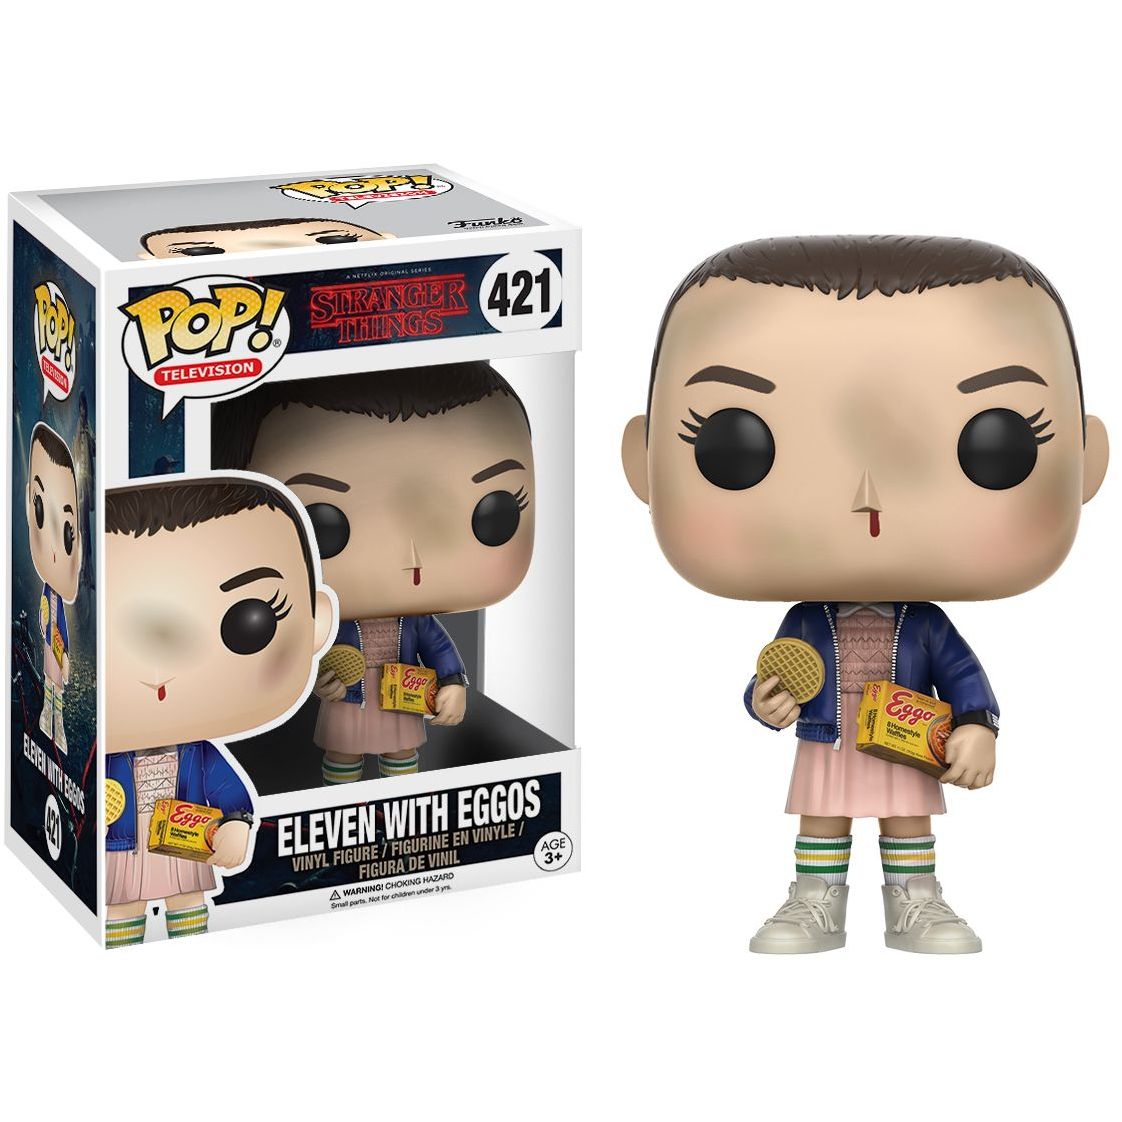 Funko Pop! Television Stranger Things Eleven with Eggos 3.75-Inch Vinyl Figure (With Chase*)